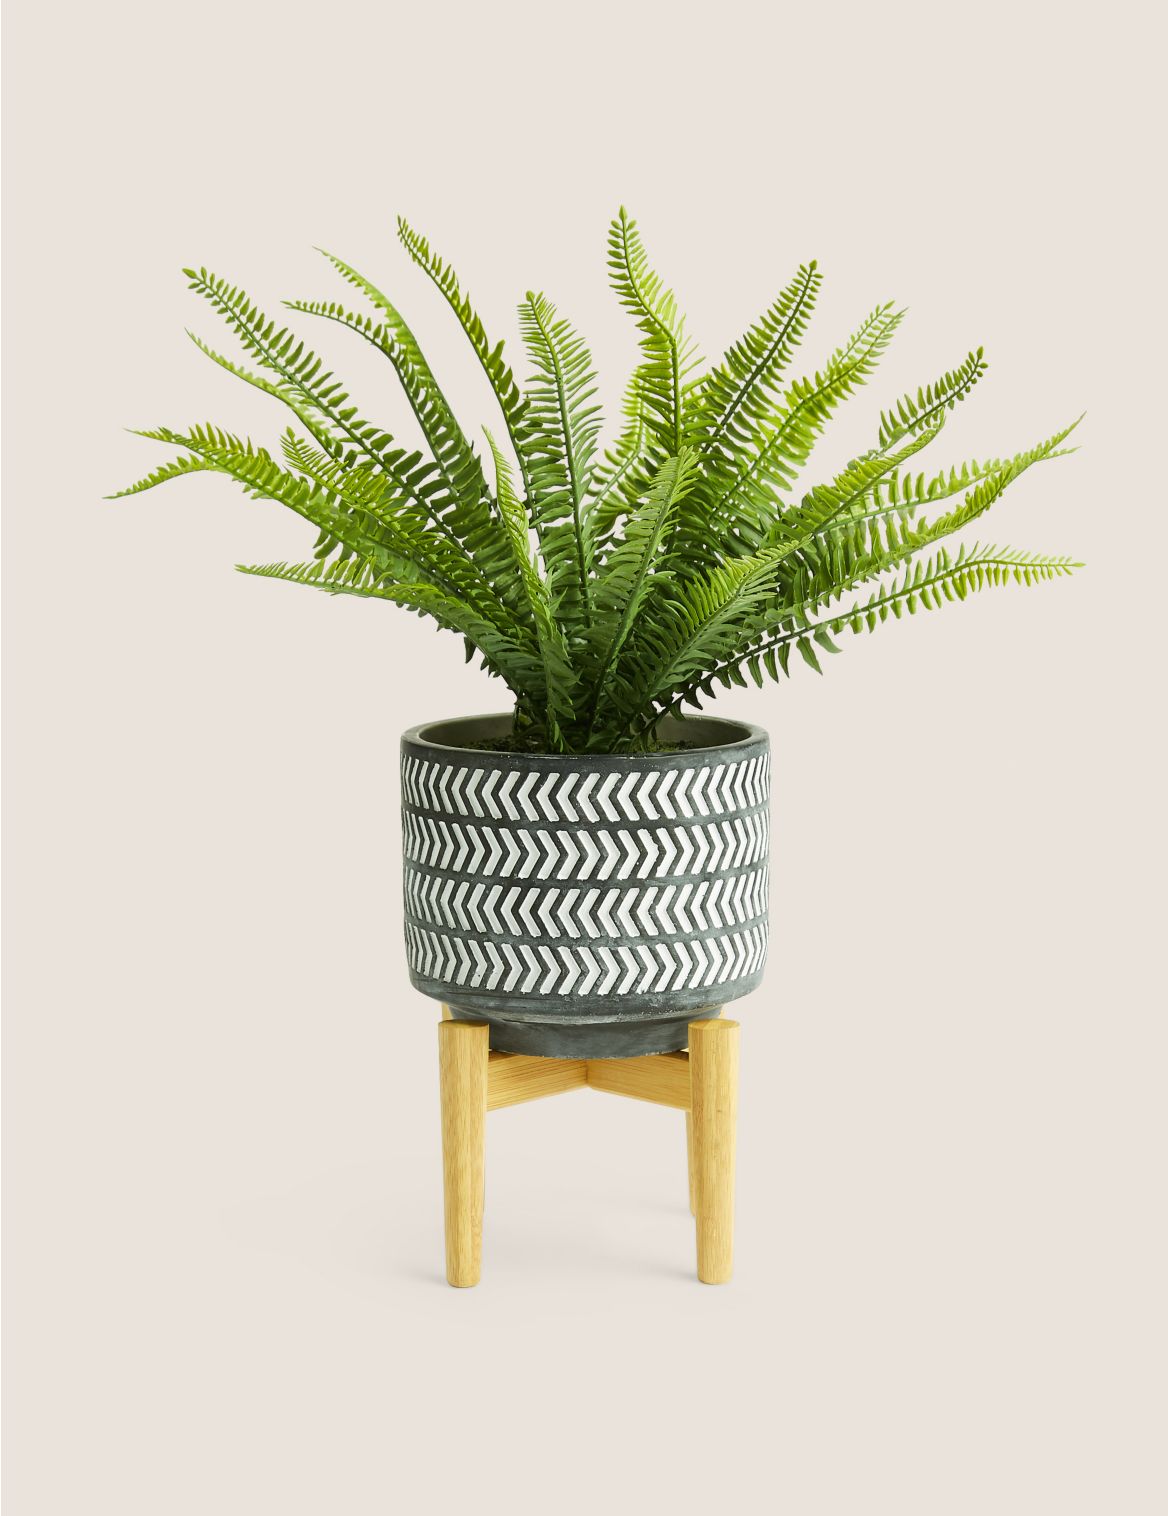 Artificial Boston Fern Planter with Stand green